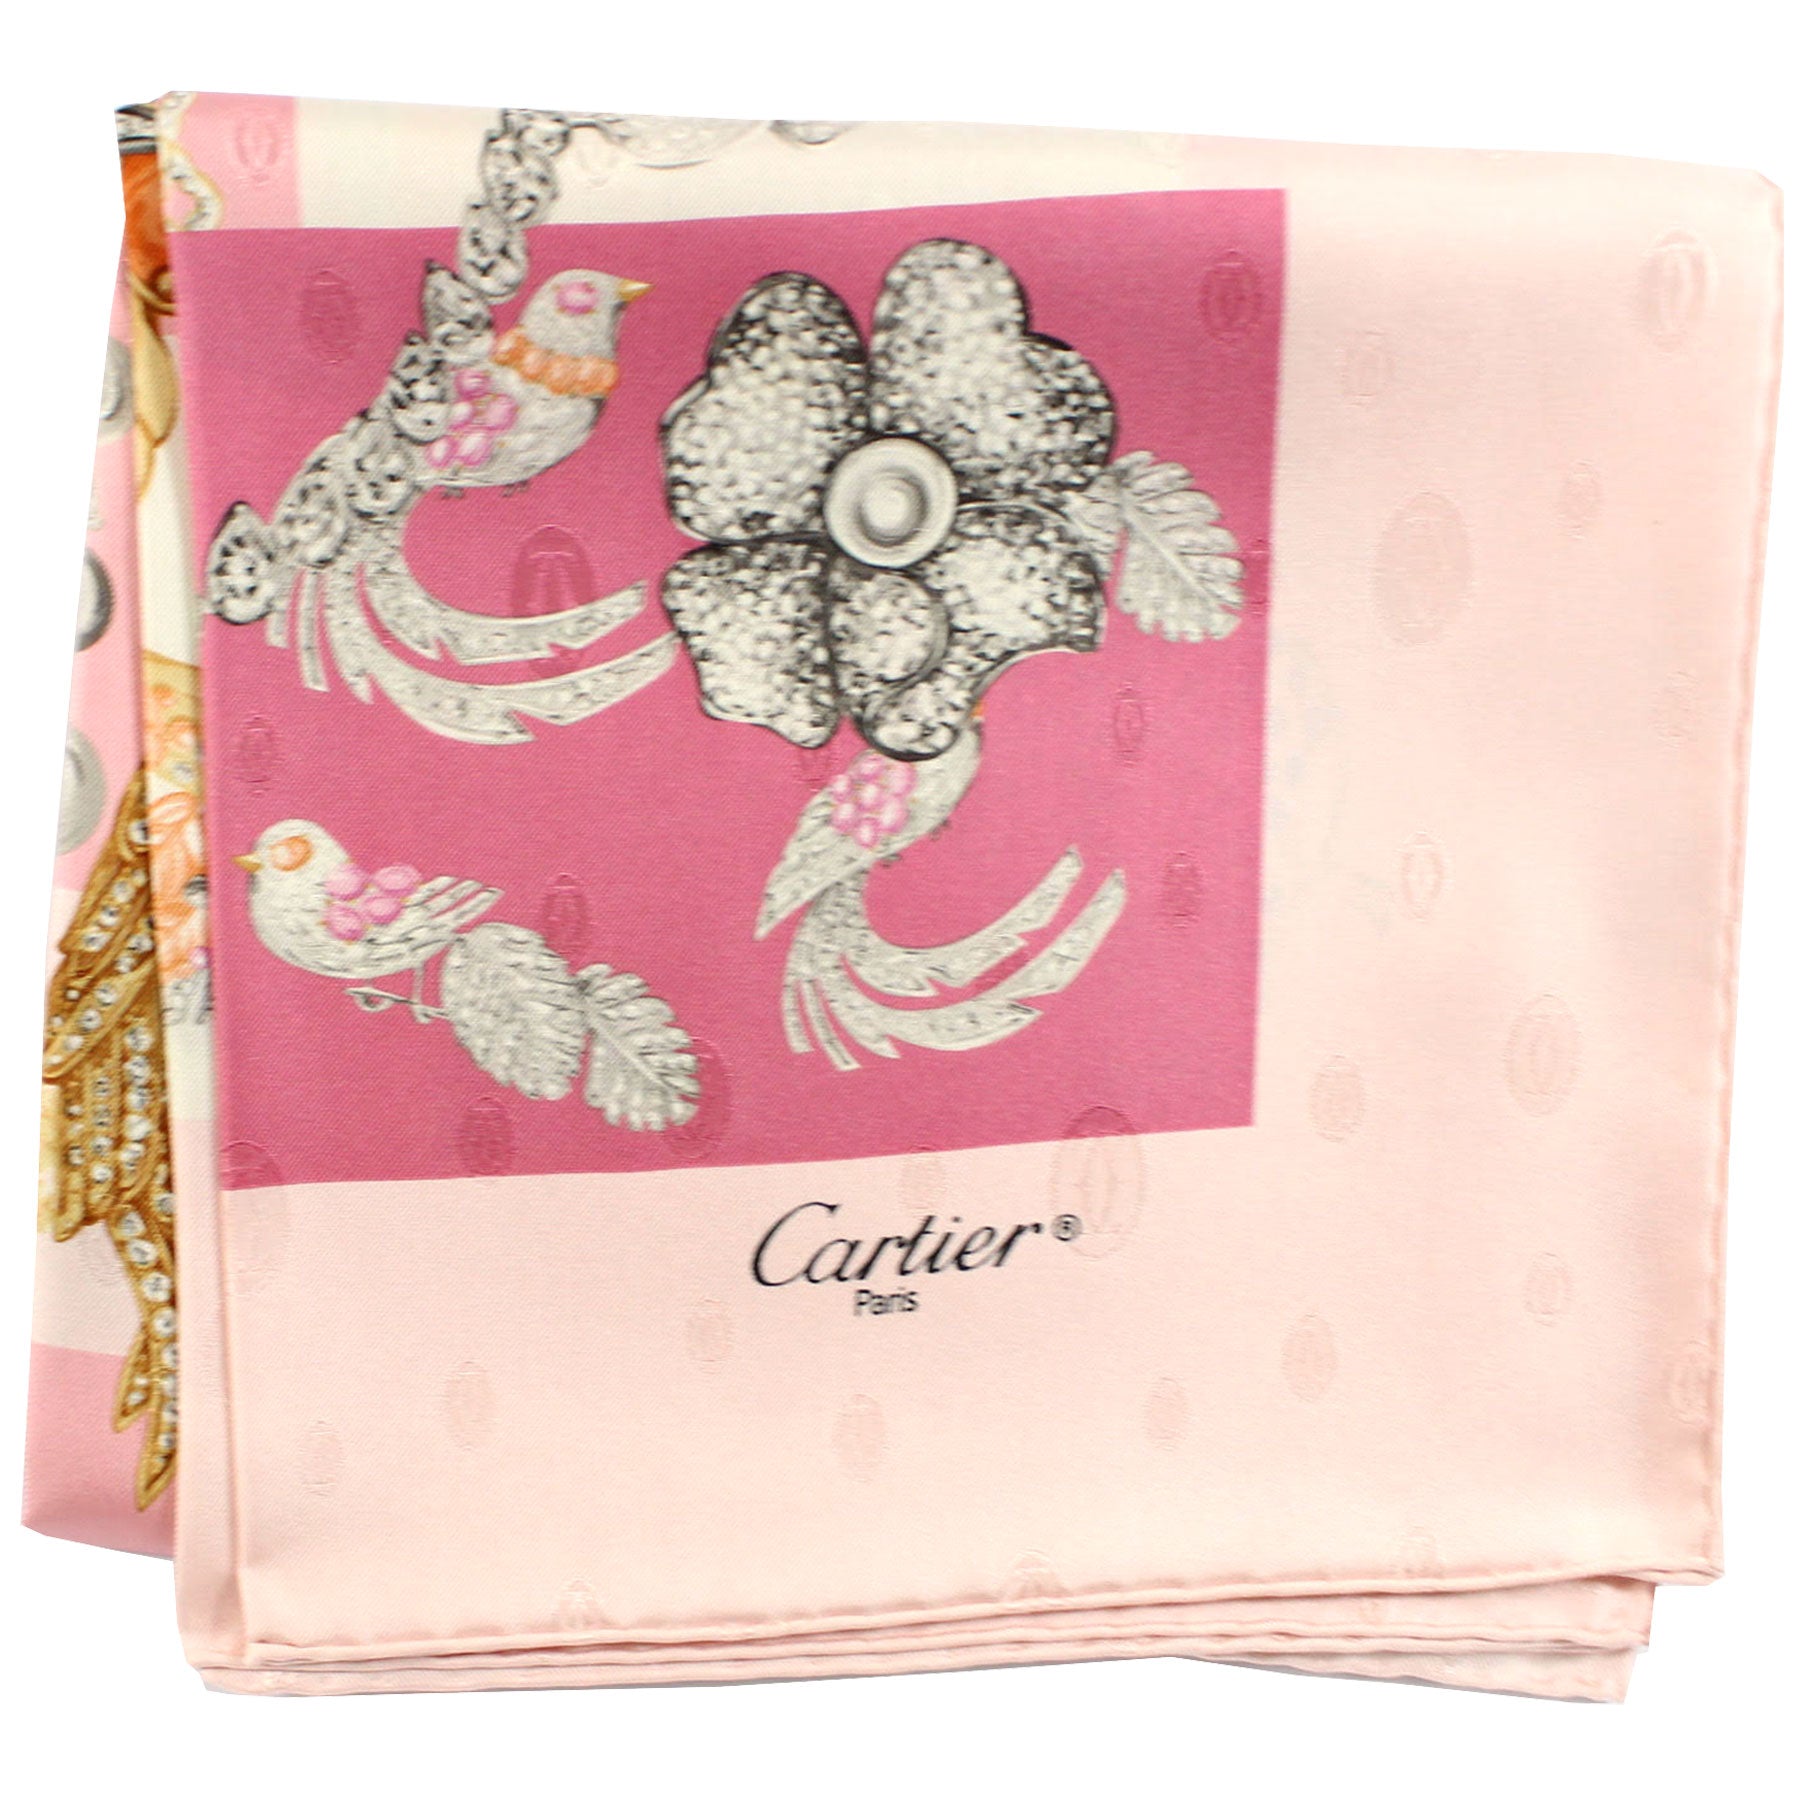 Cartier Scarf Pink Gold Floral - Twill Silk 36 Inch Square Foulard